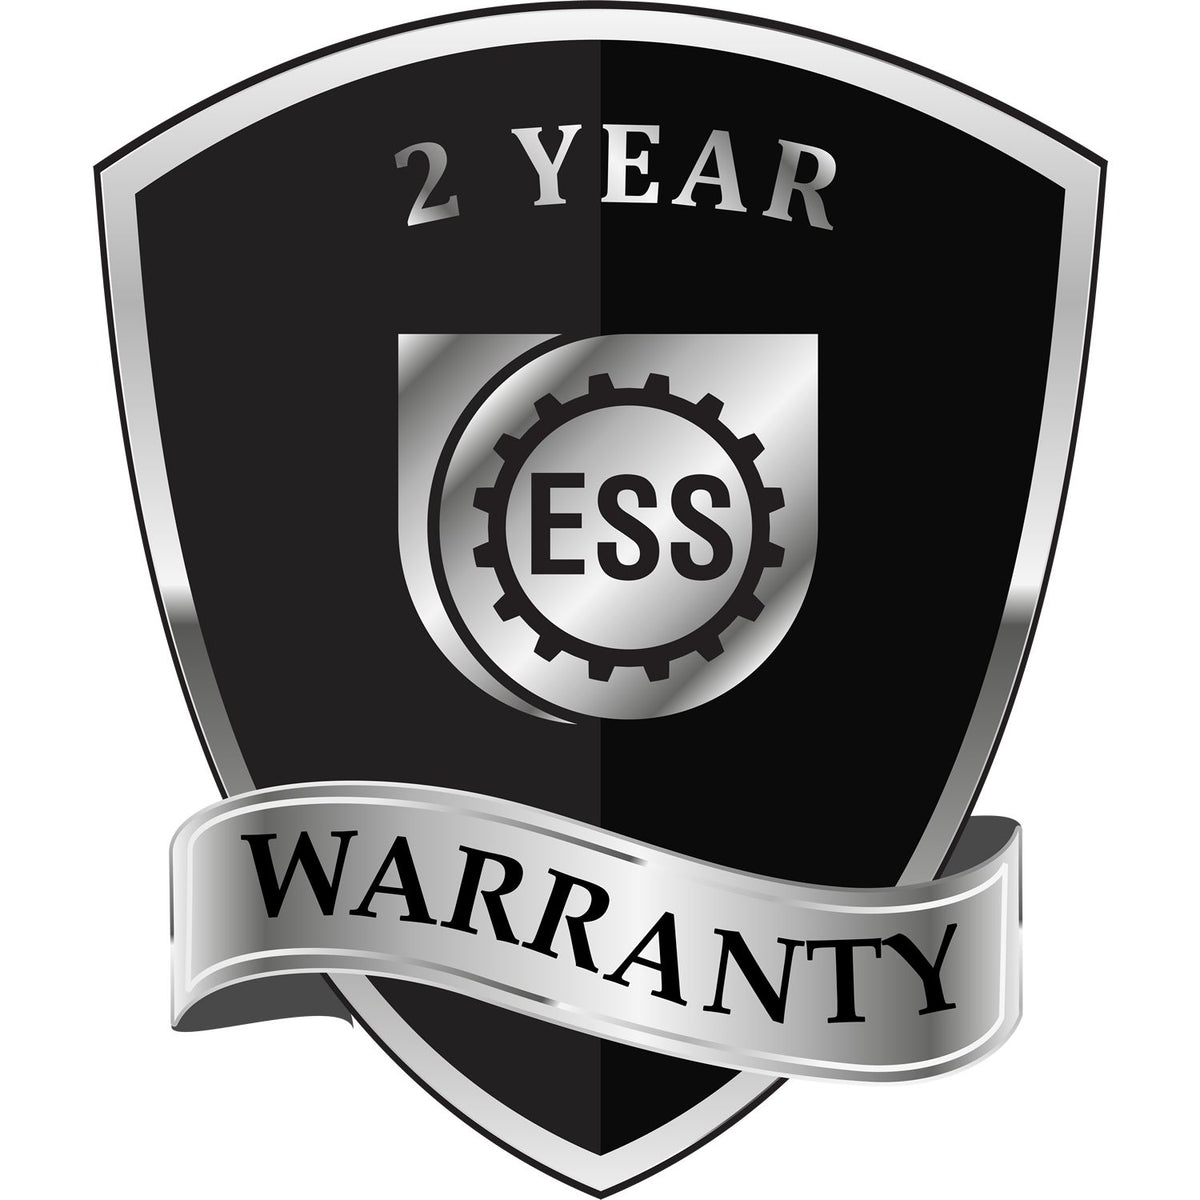 A badge or emblem showing a warranty icon for the State of Maine Architectural Seal Embosser